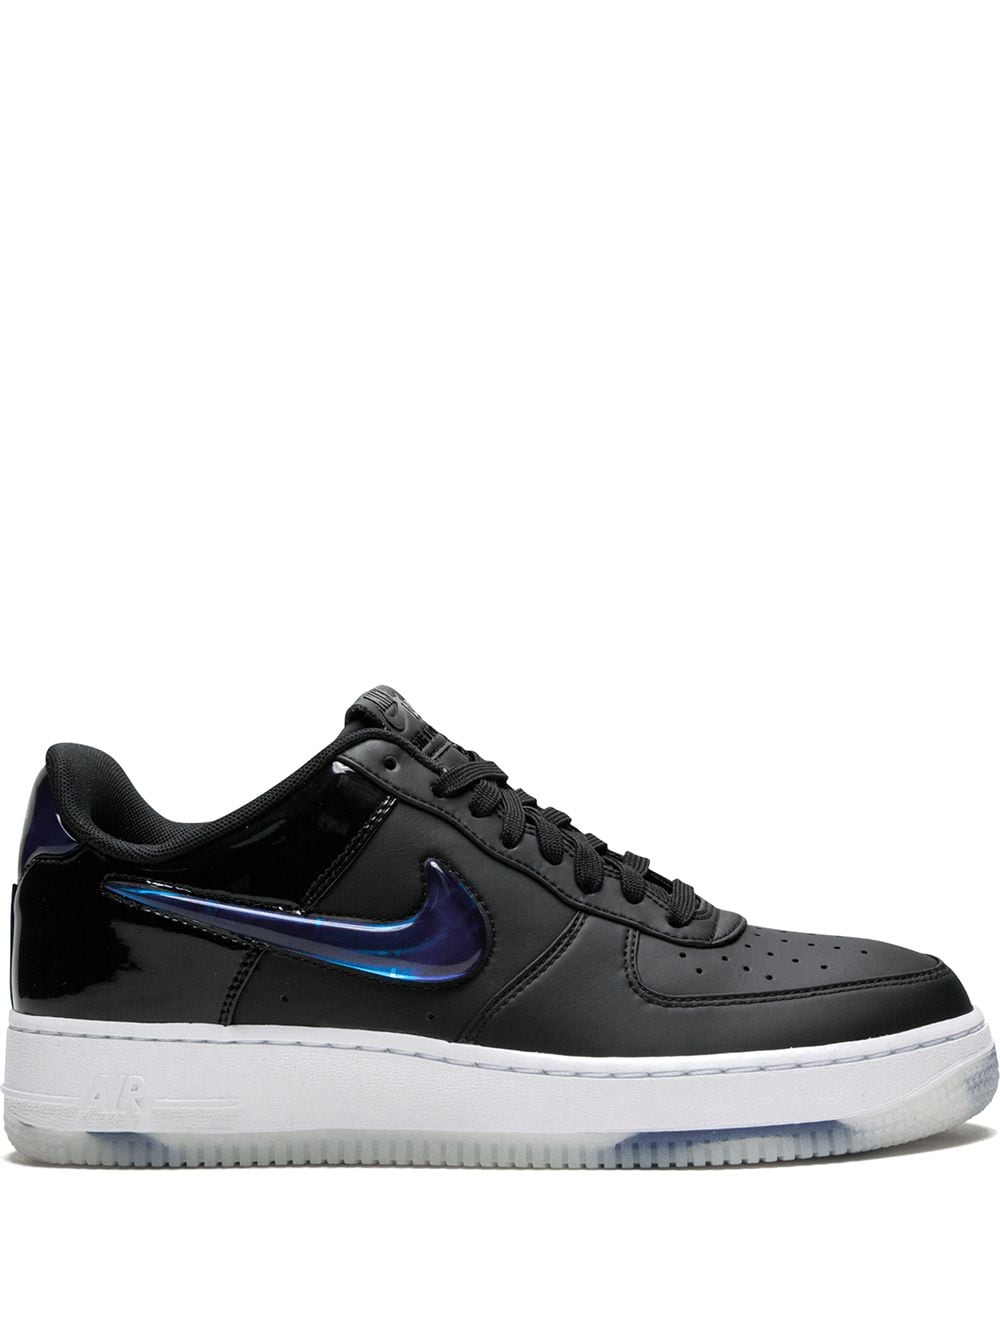 x Playstation Air Force 1 Playstation '18 QS sneakers